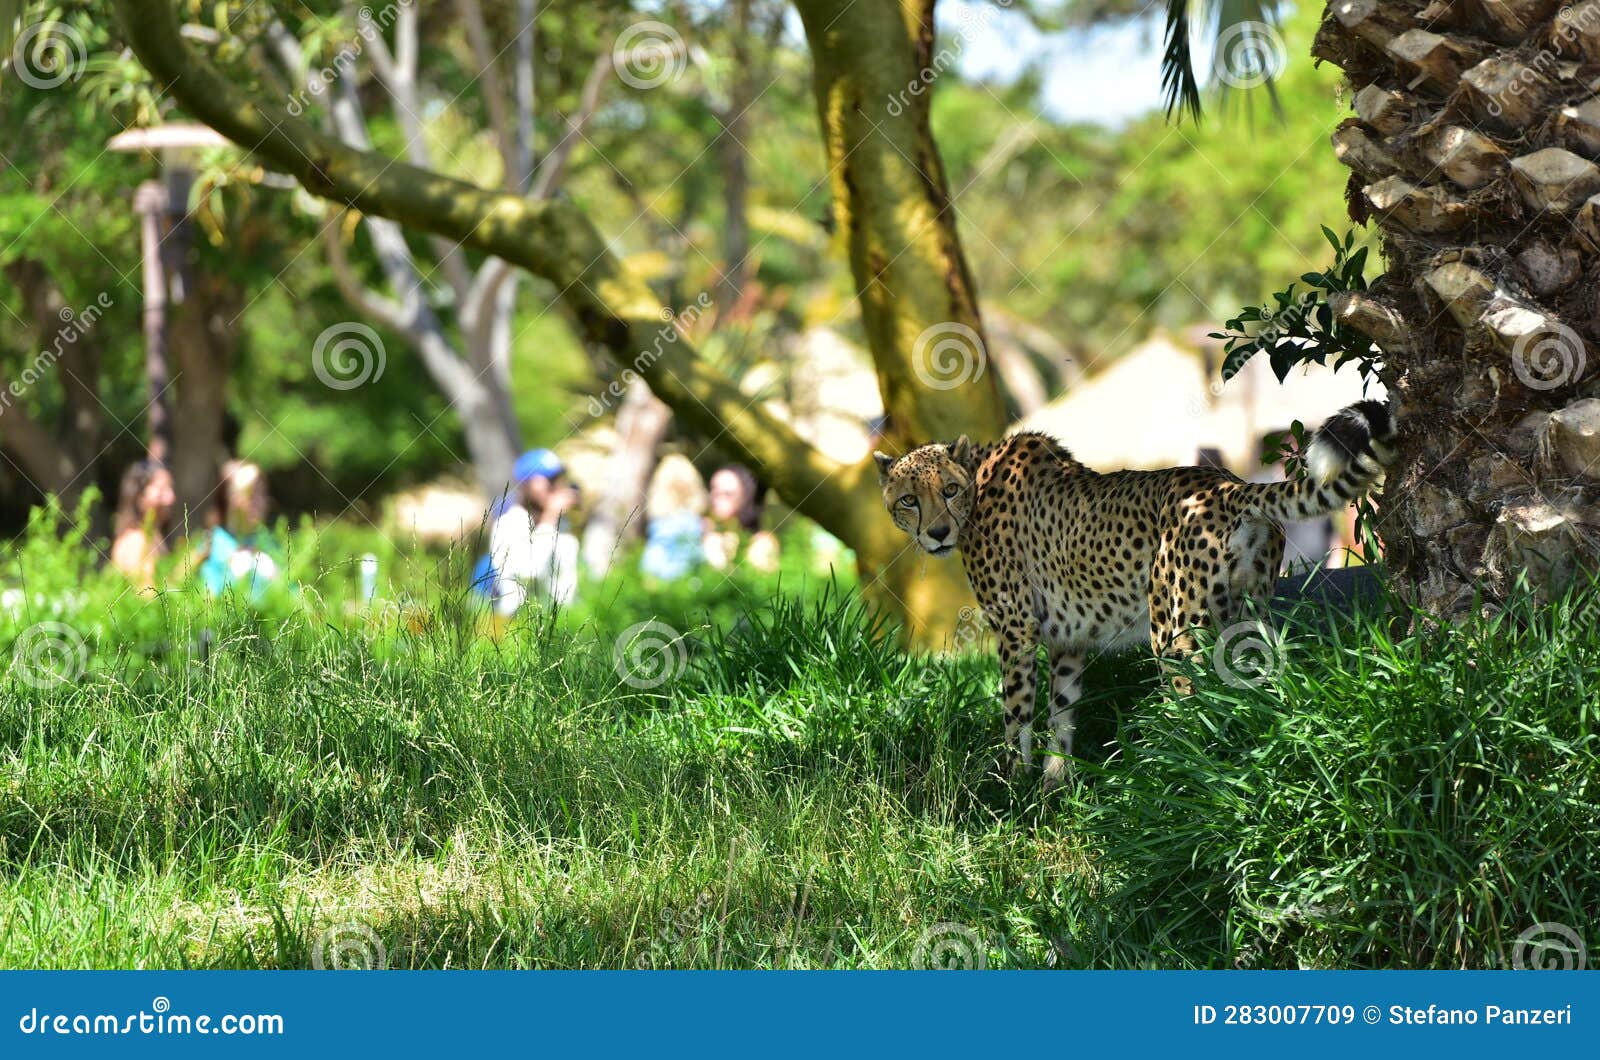 Cheetah in shade in a zoo editorial stock image. Image of fashion ...